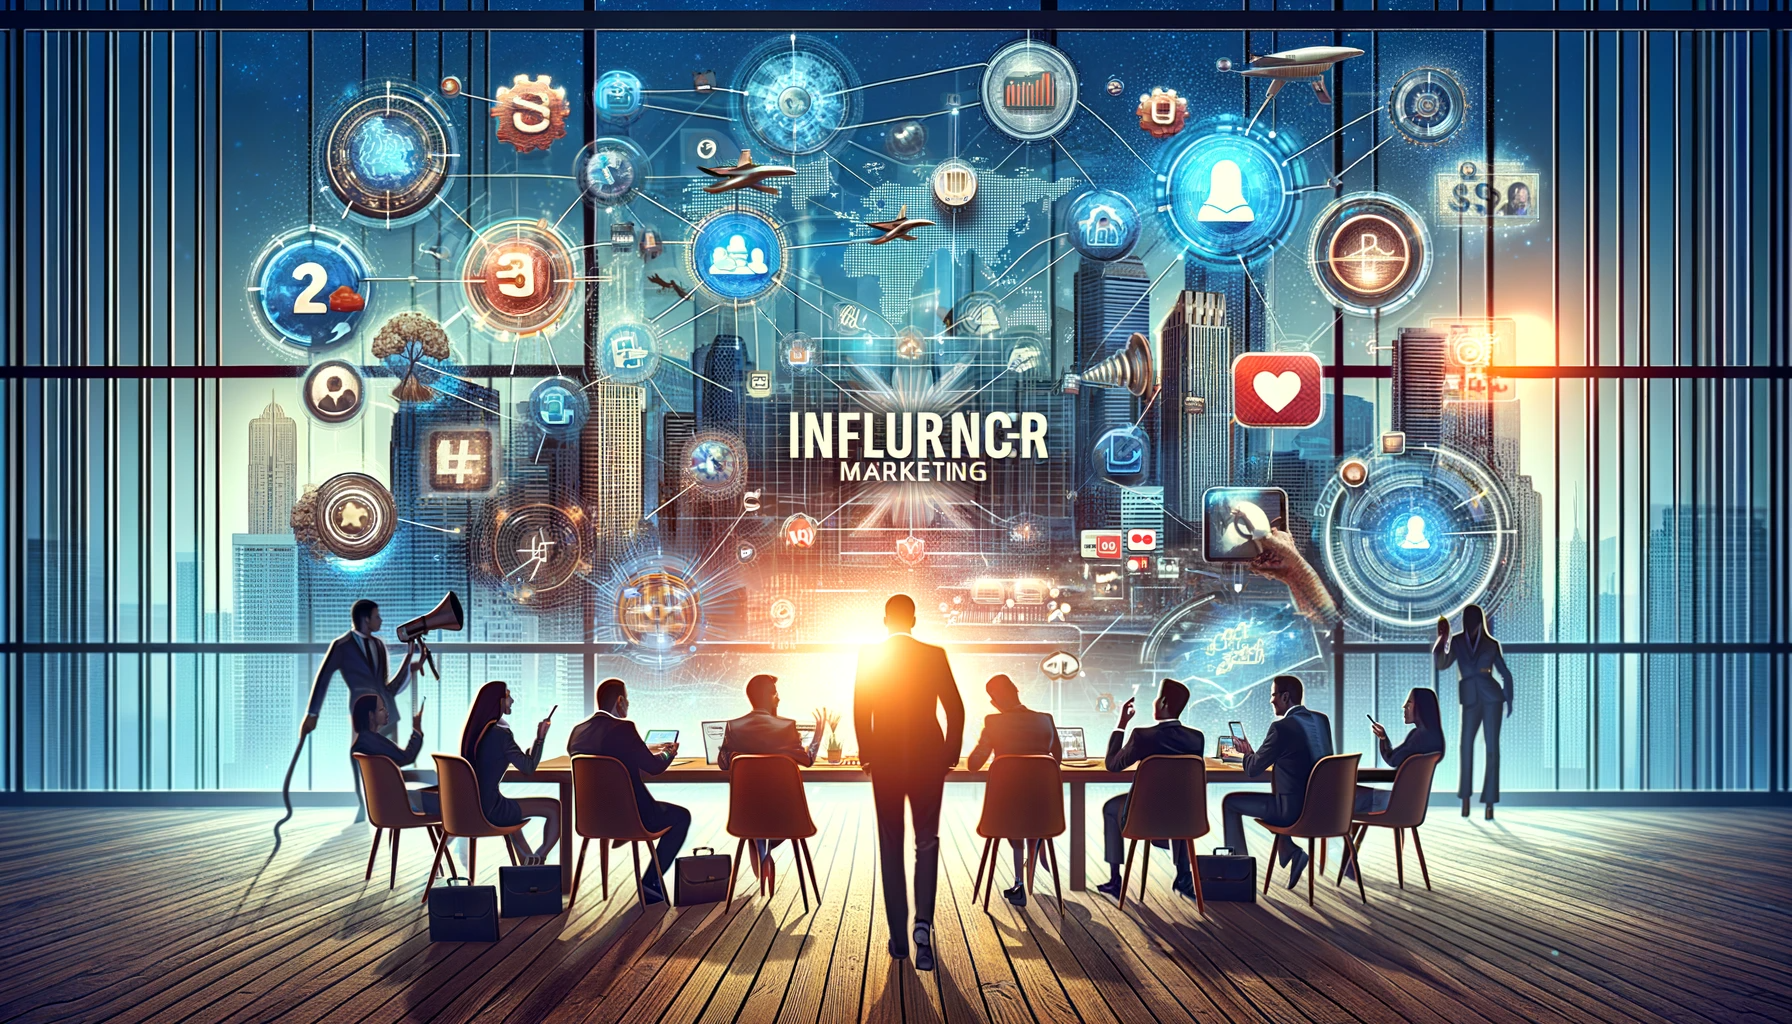 What Makes an Influencer Marketing Campaign Authentically Engaging?